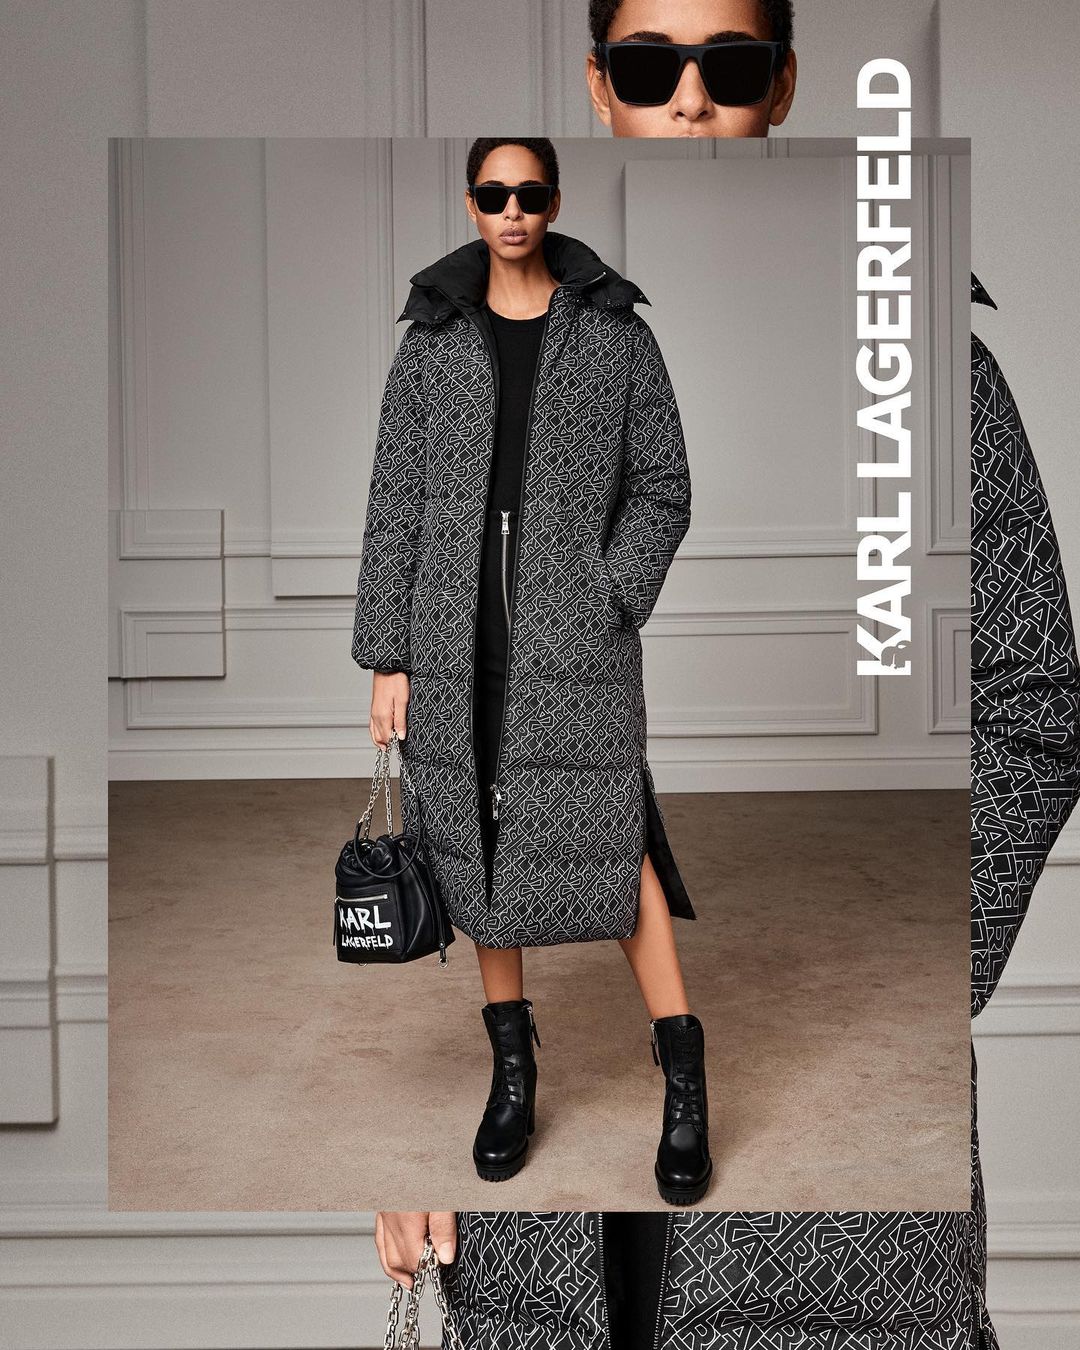 KARL LAGERFELD - Winter is coming. ❄️ This season, play with the dramatic proportions of an oversized puffer coat. #KARLLAGERFELD #FALL20